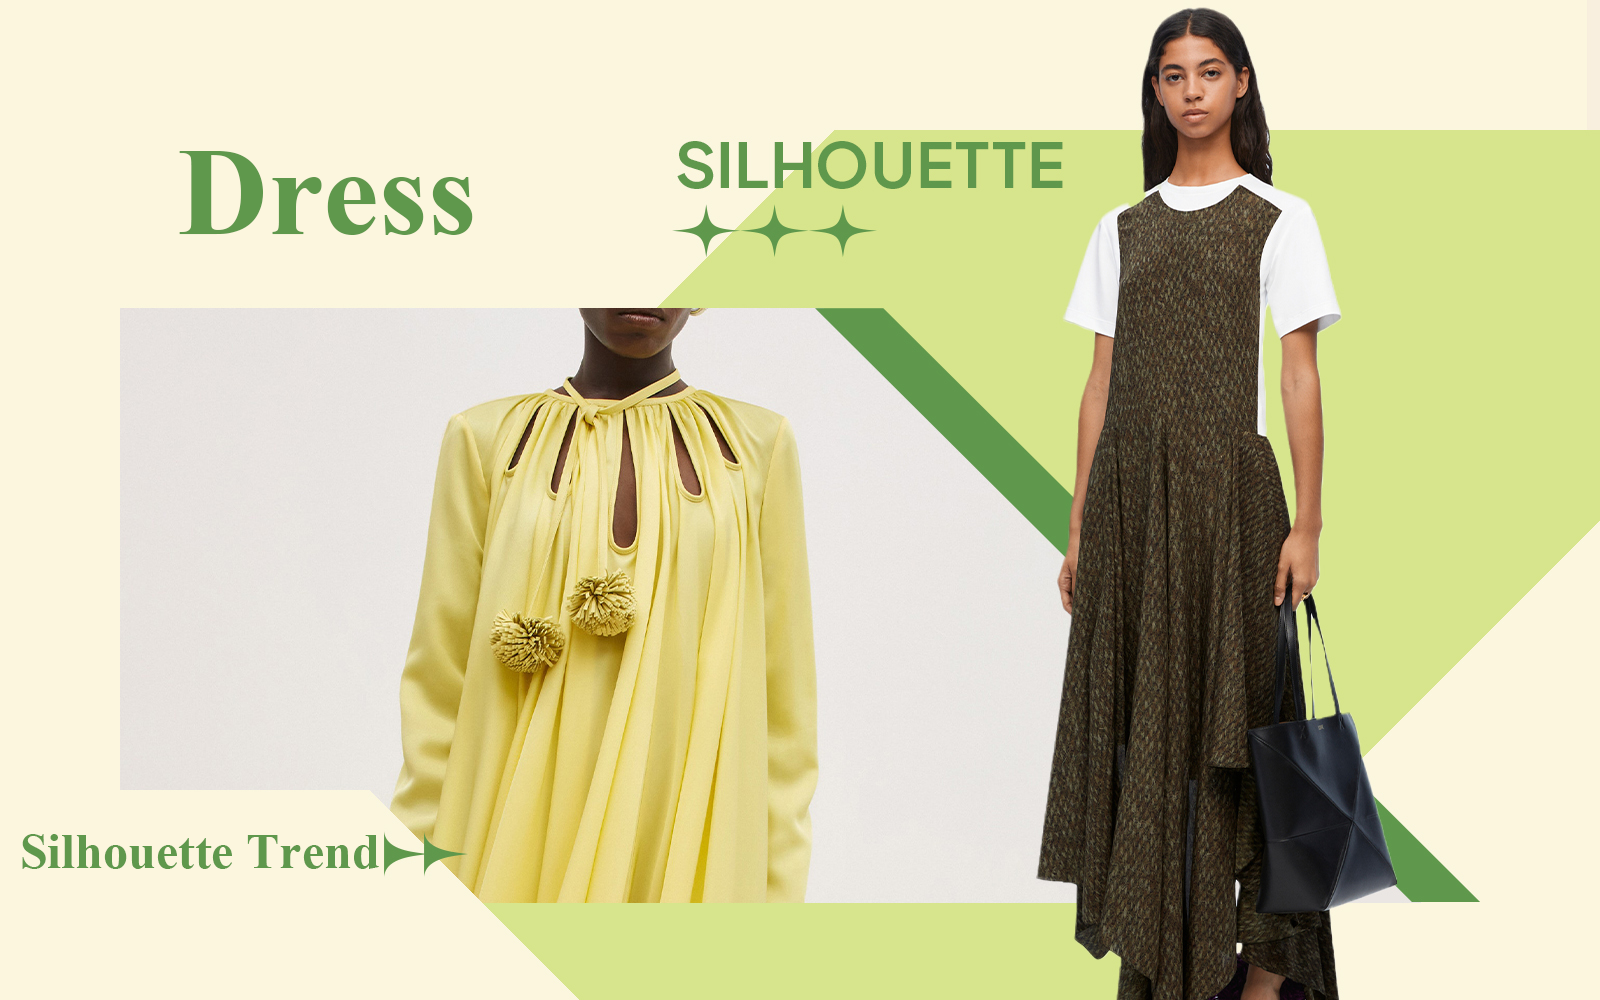 Minimalist Intellectuality -- The Silhouette Trend for Women's Dress